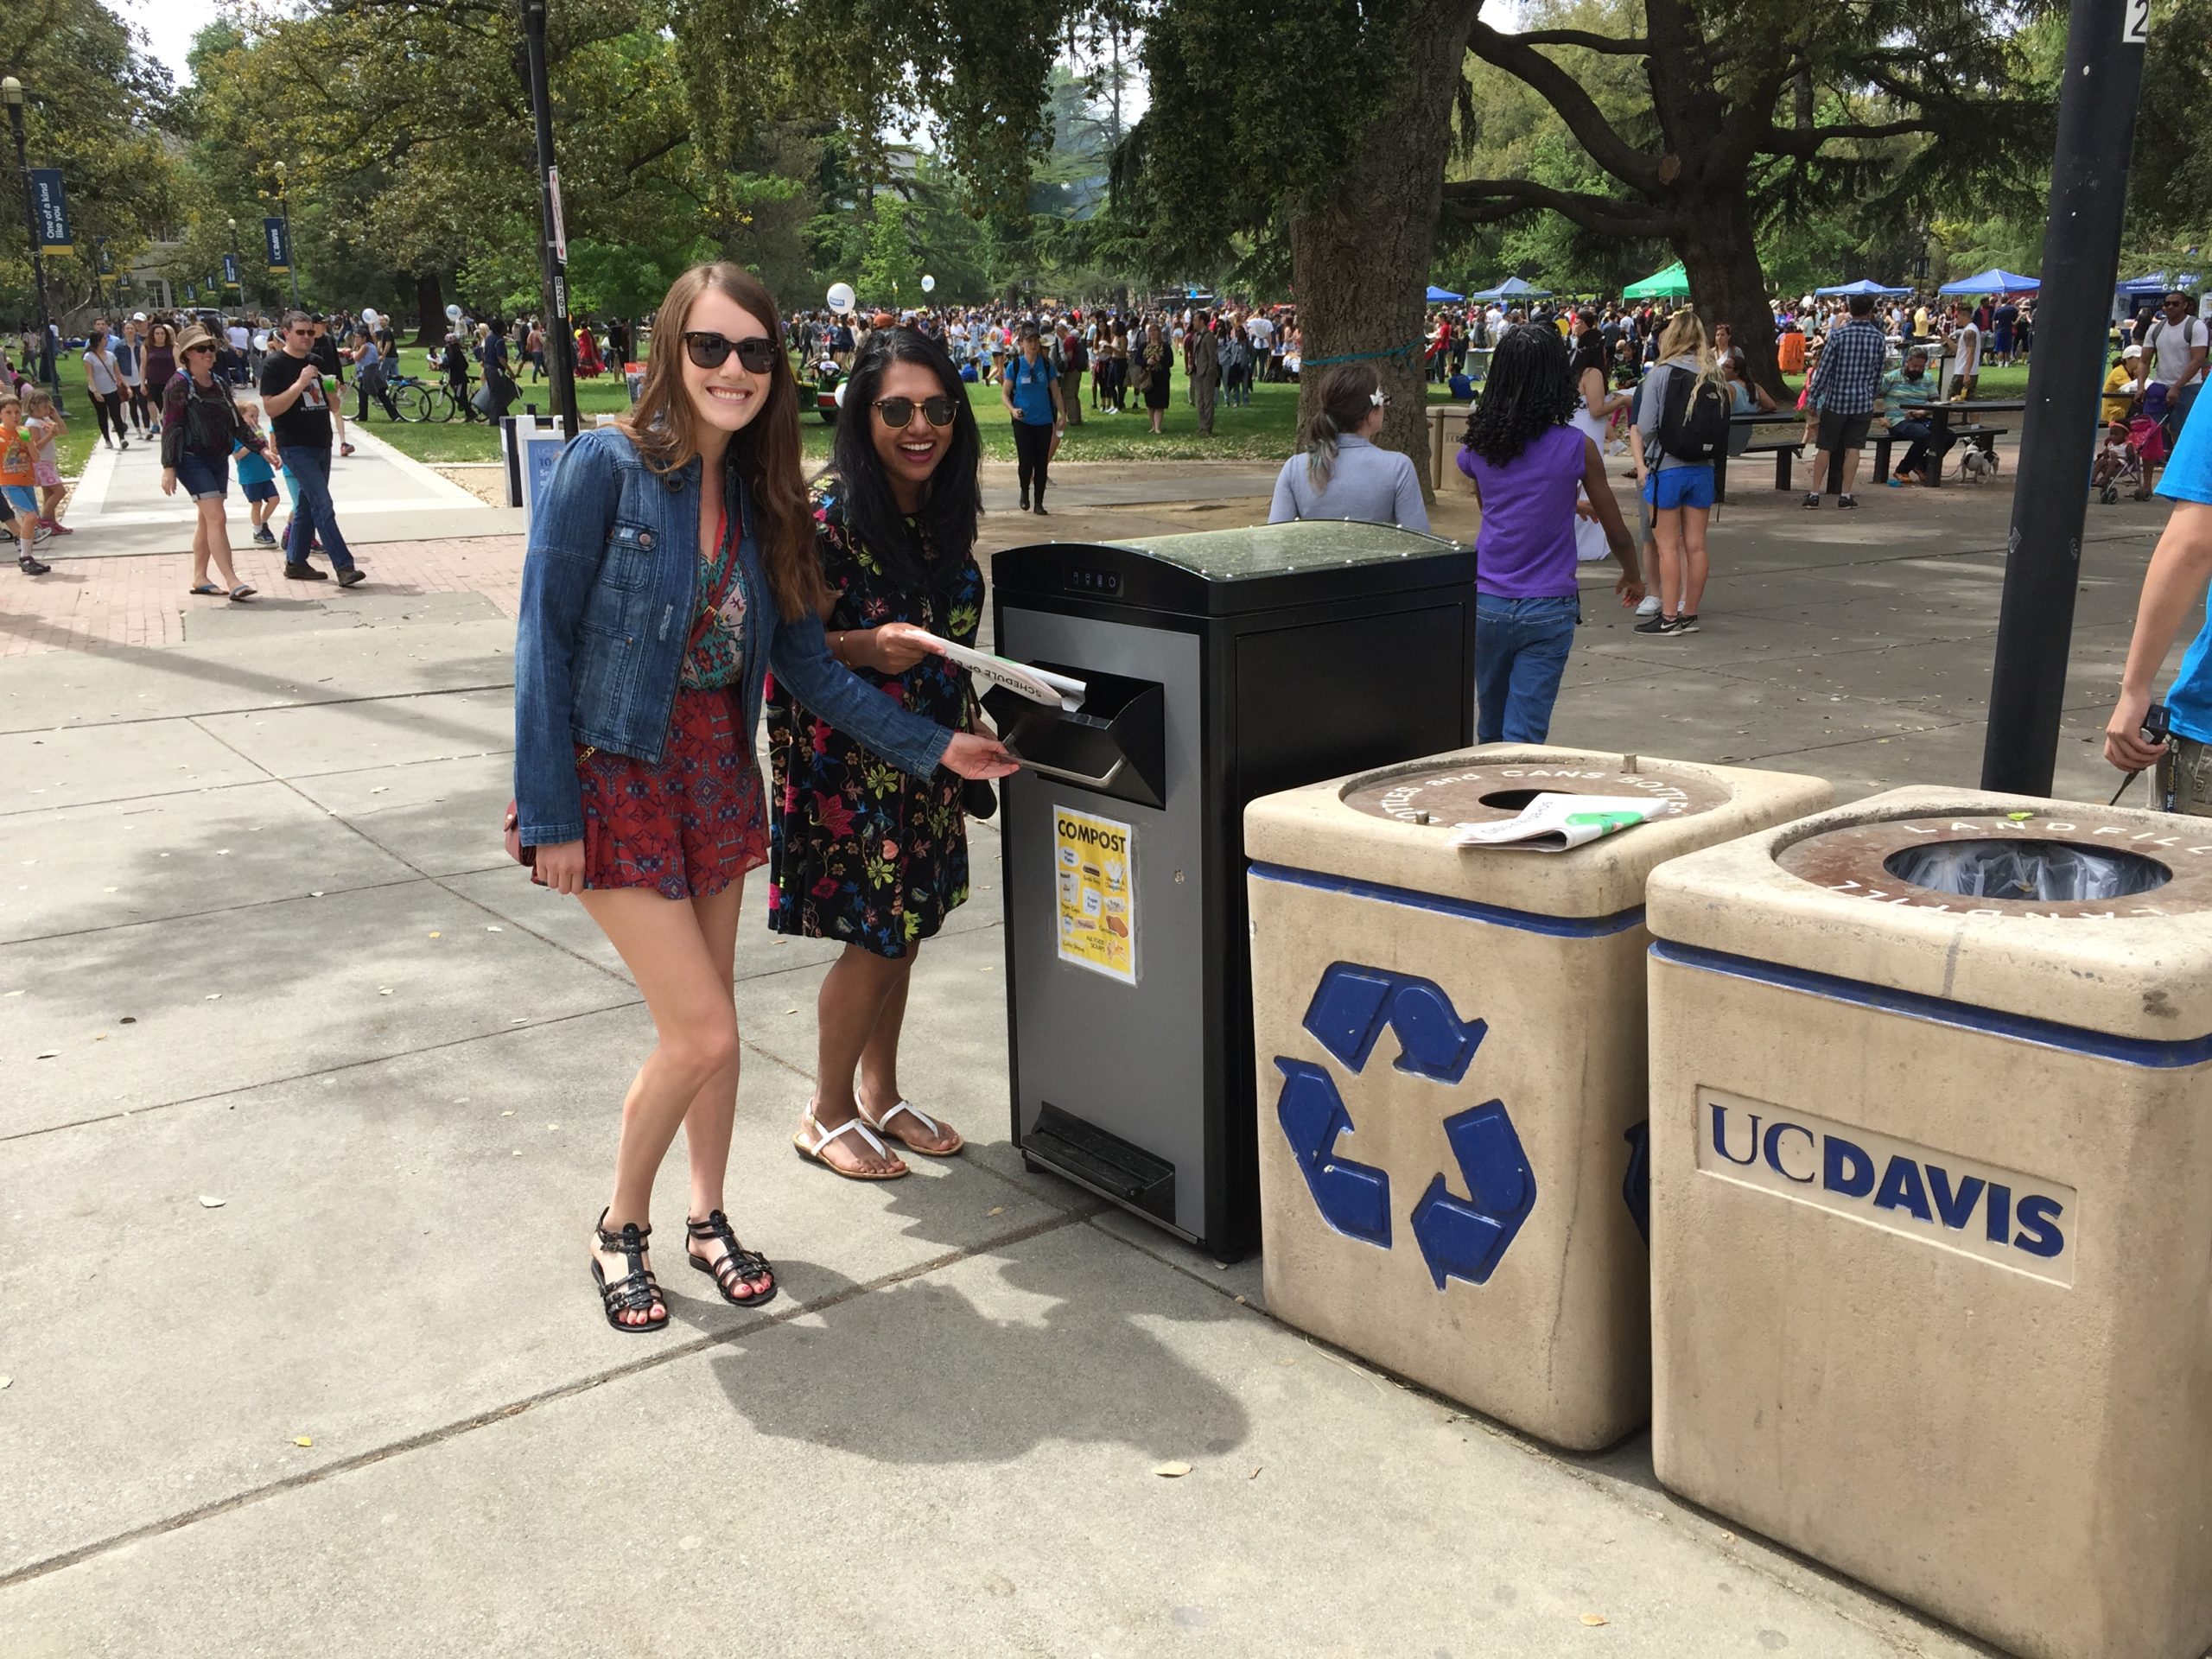 What are Smart Malls, Parks, and Universities Using to Control Public Trash?